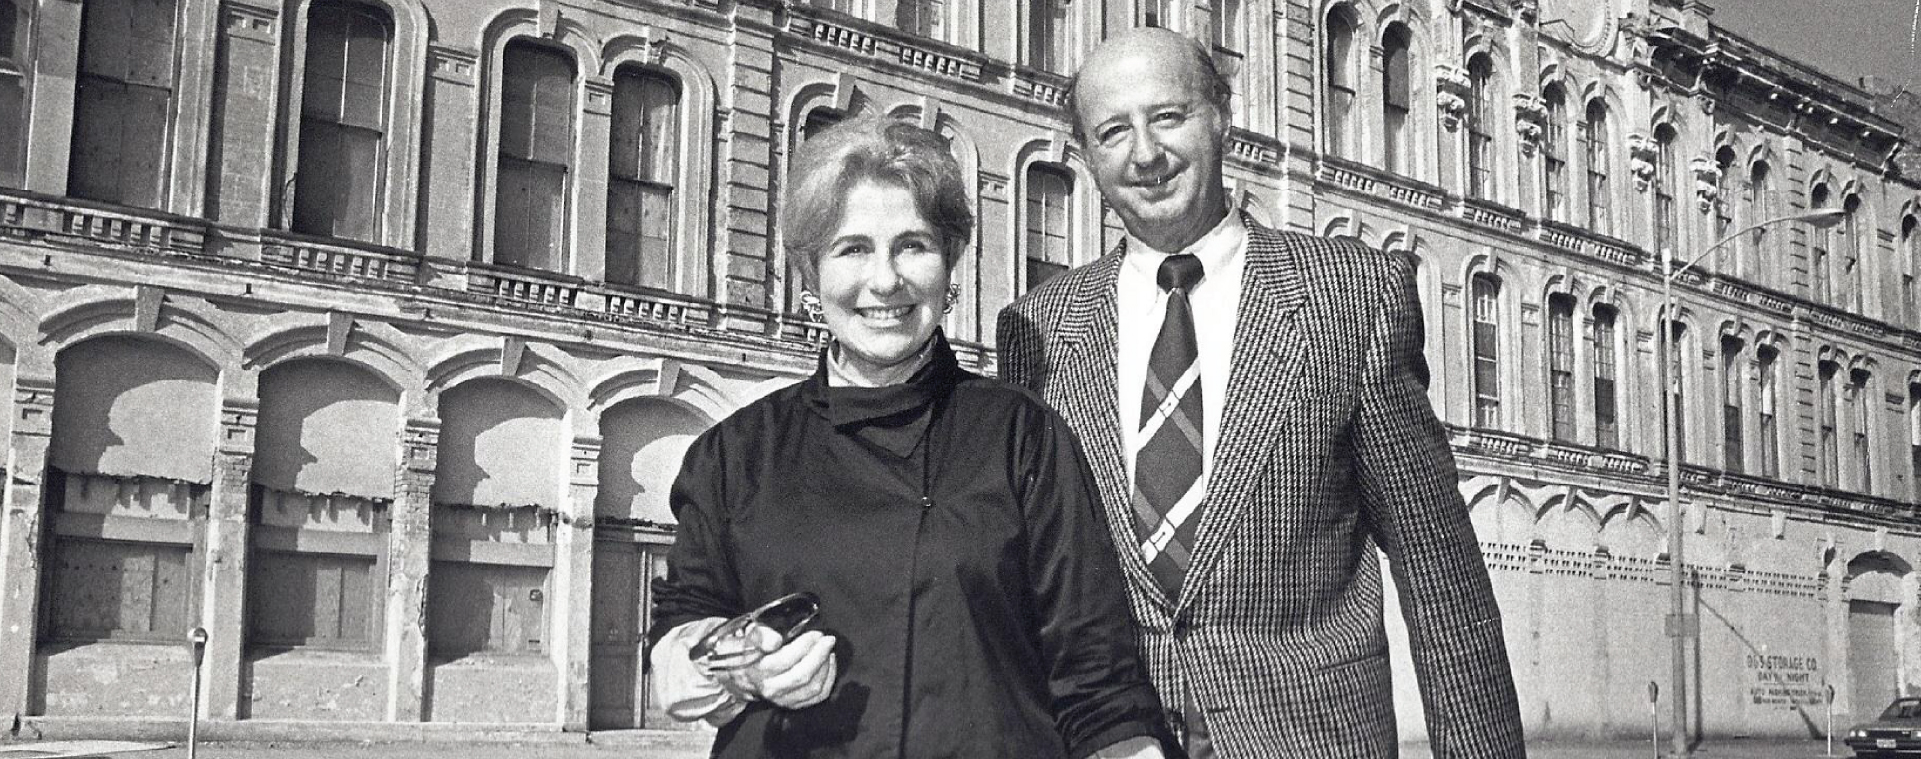 A historic, black and white photo of Cynthia Woods Mitchell and her husband in front of a building in daylight.